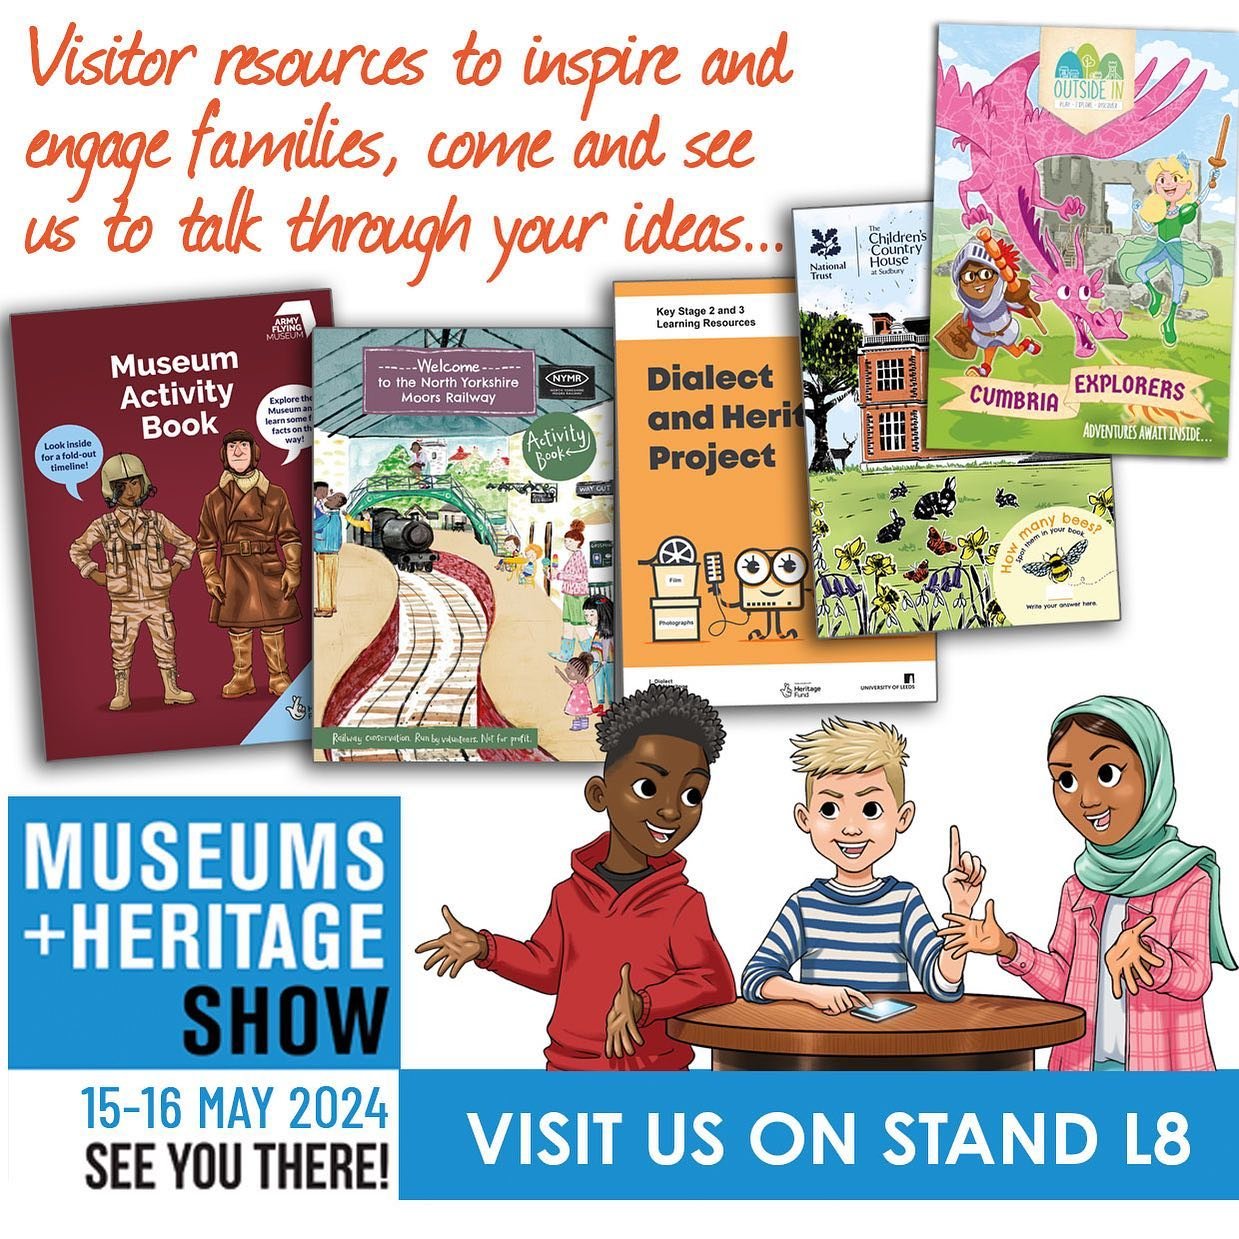 We are looking forward to returning to the @museumsandheritage show on 15th and 16th May where we will be exhibiting once again on stand L8.

Our creative team are brimming with ideas, come along to our stand where we will be ready to discuss how we 